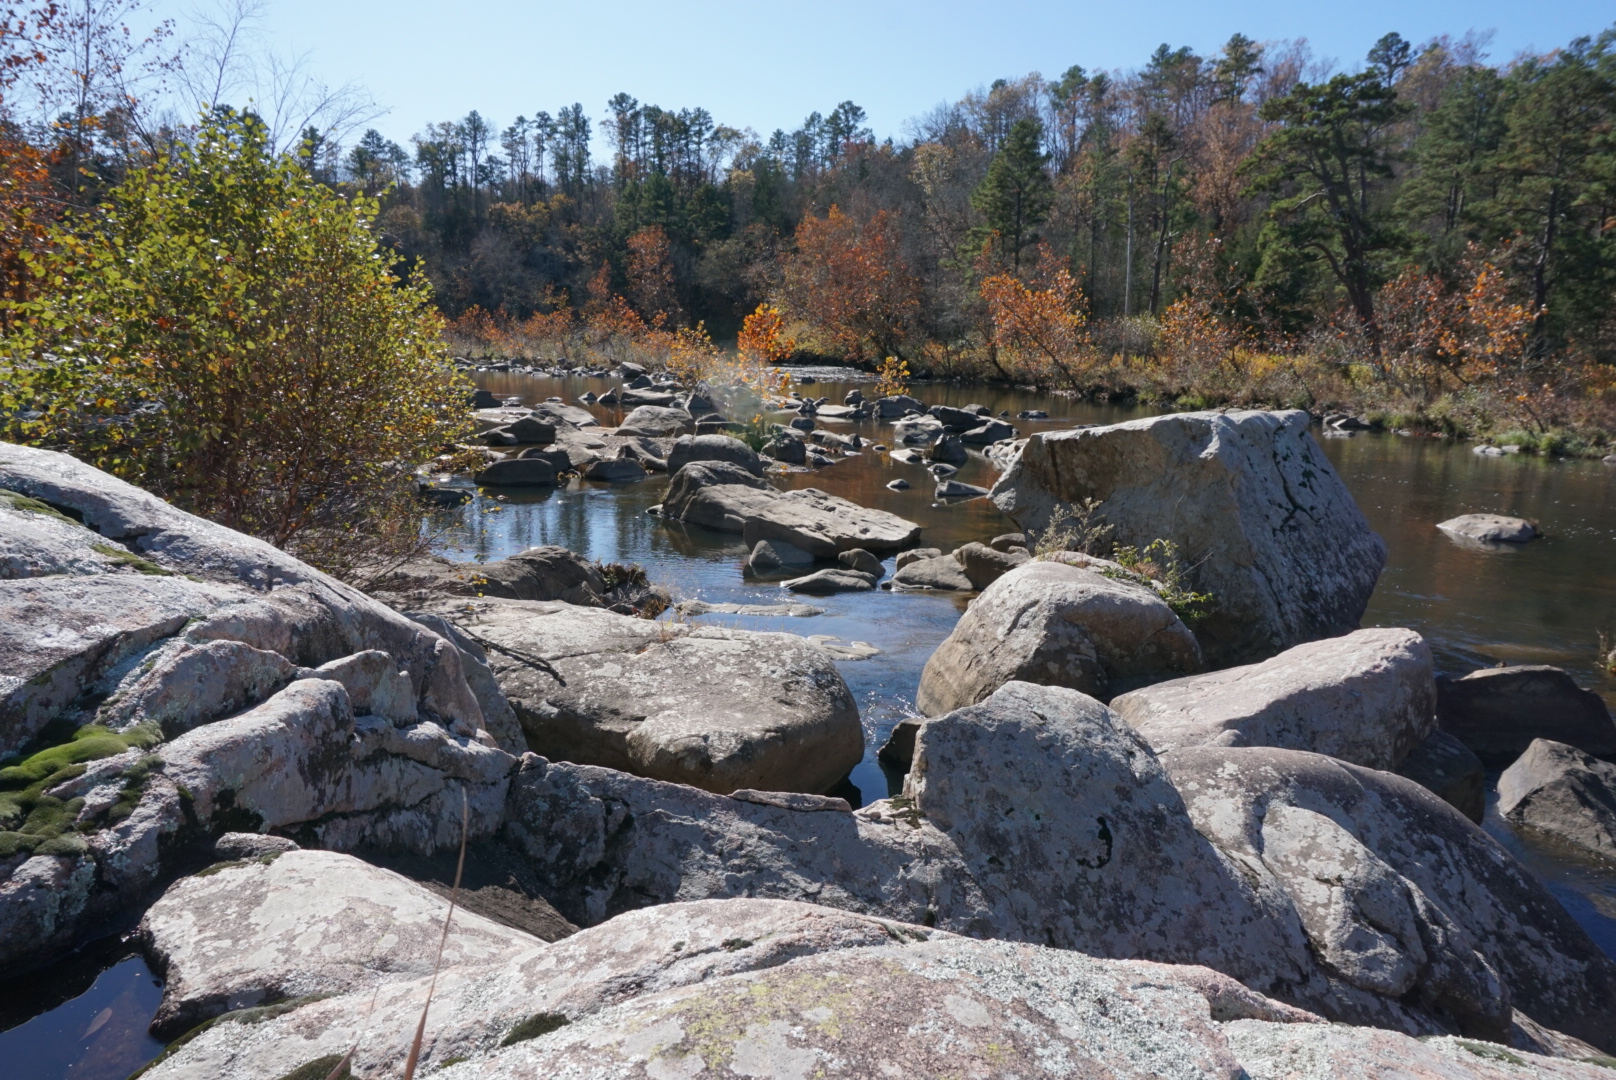 Granite boulders among the fall colors on the St. Francis River